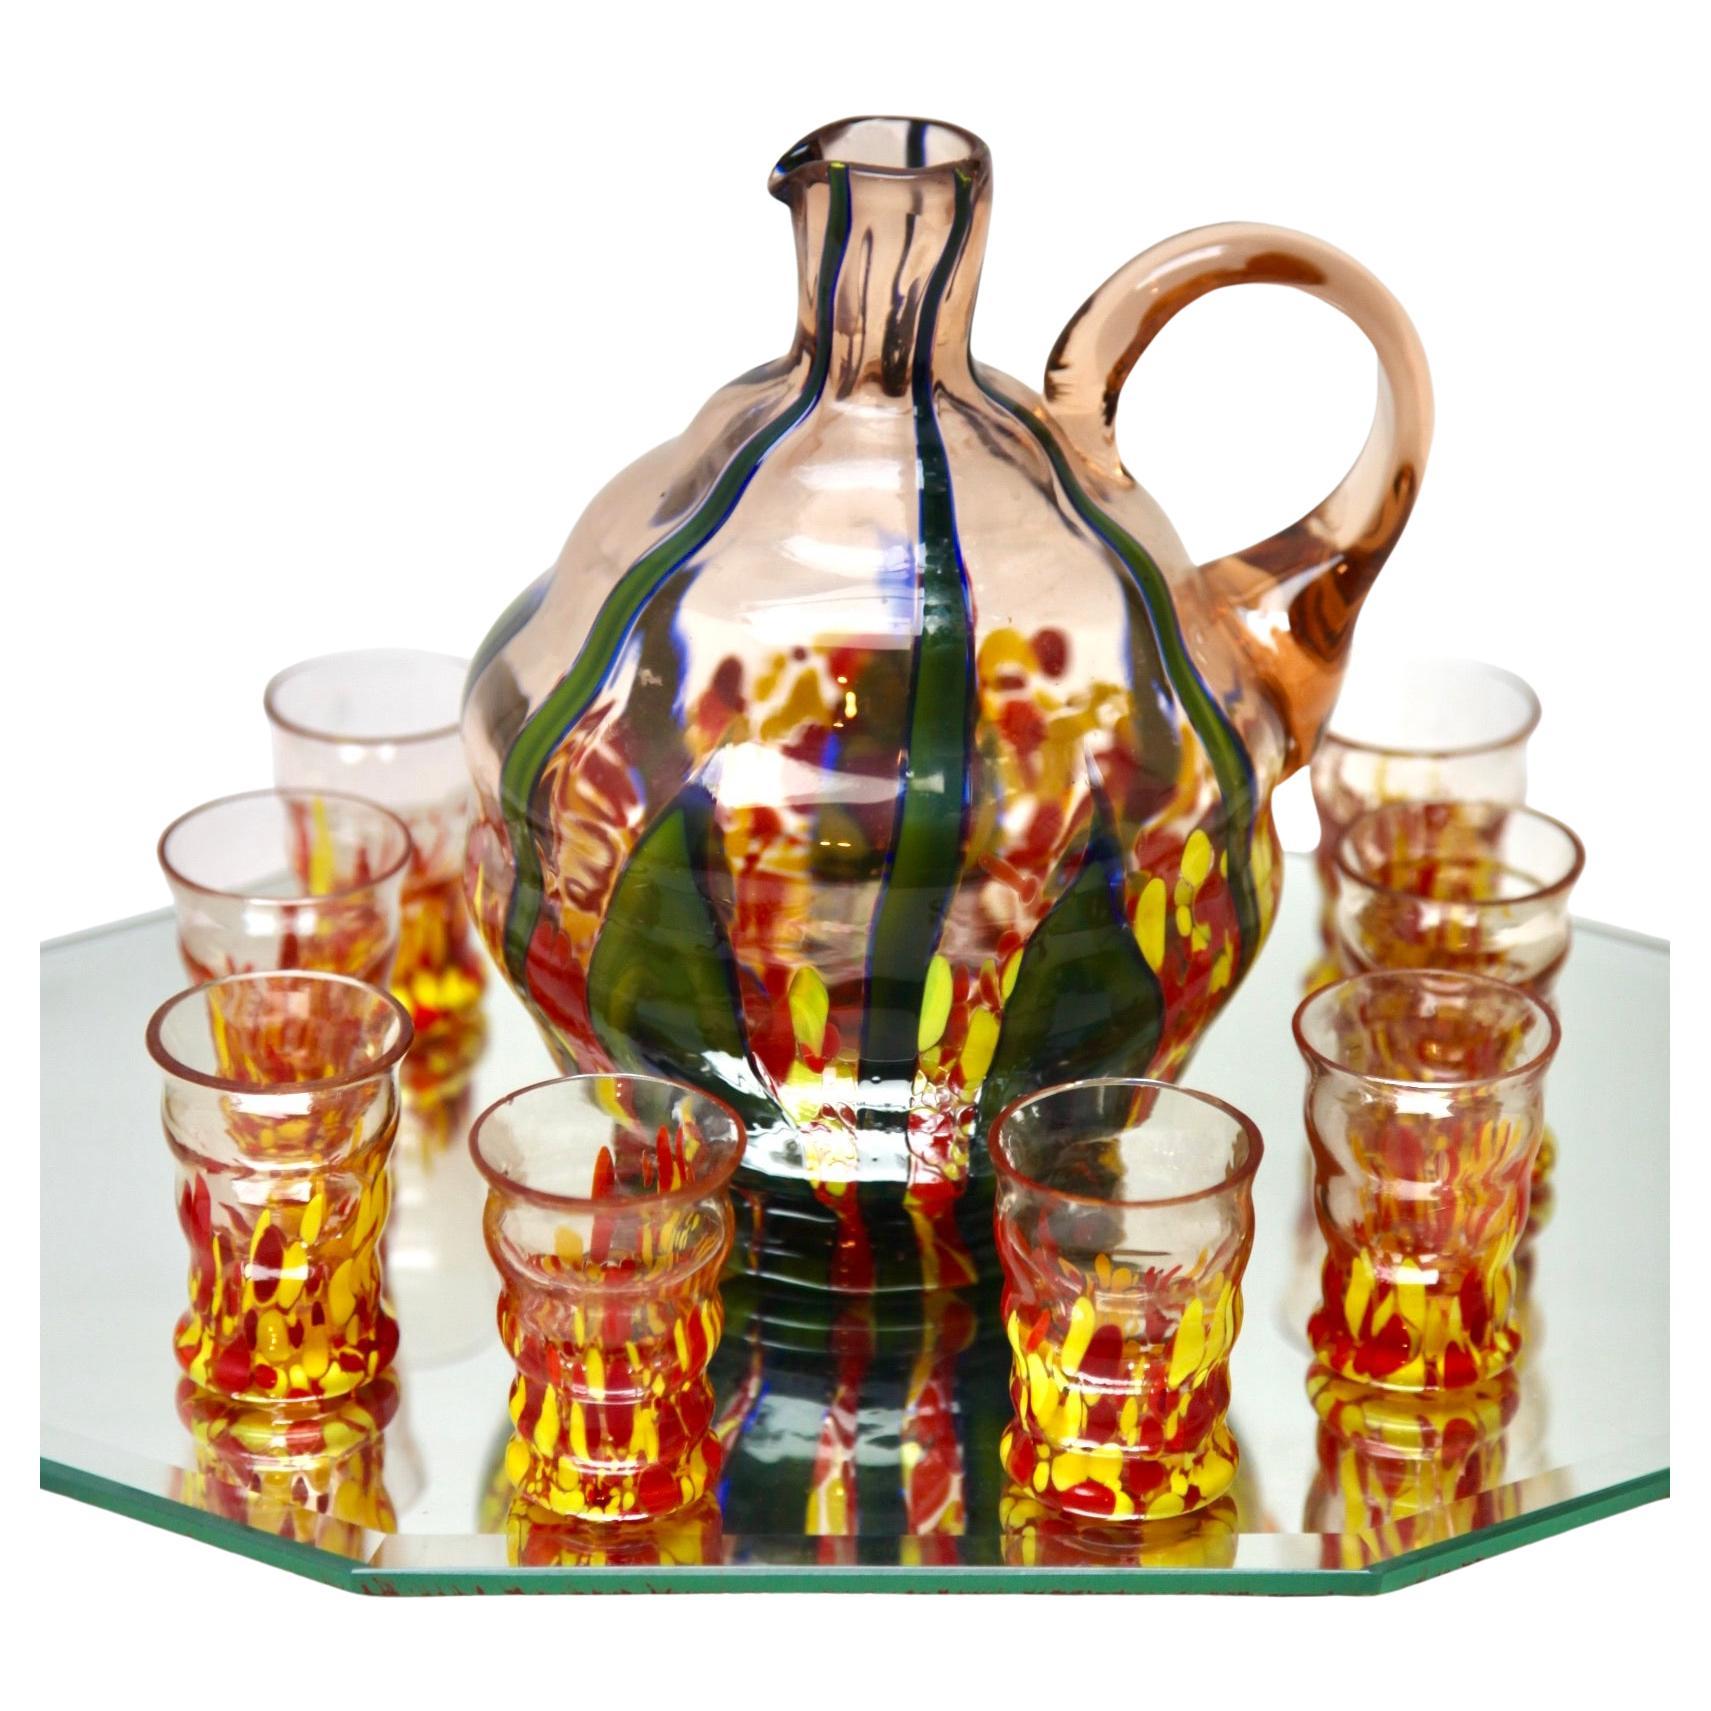 Murano Liqueur Set 8 Shot Glasses and Decanter, with Serving Tray, circa 1938 For Sale